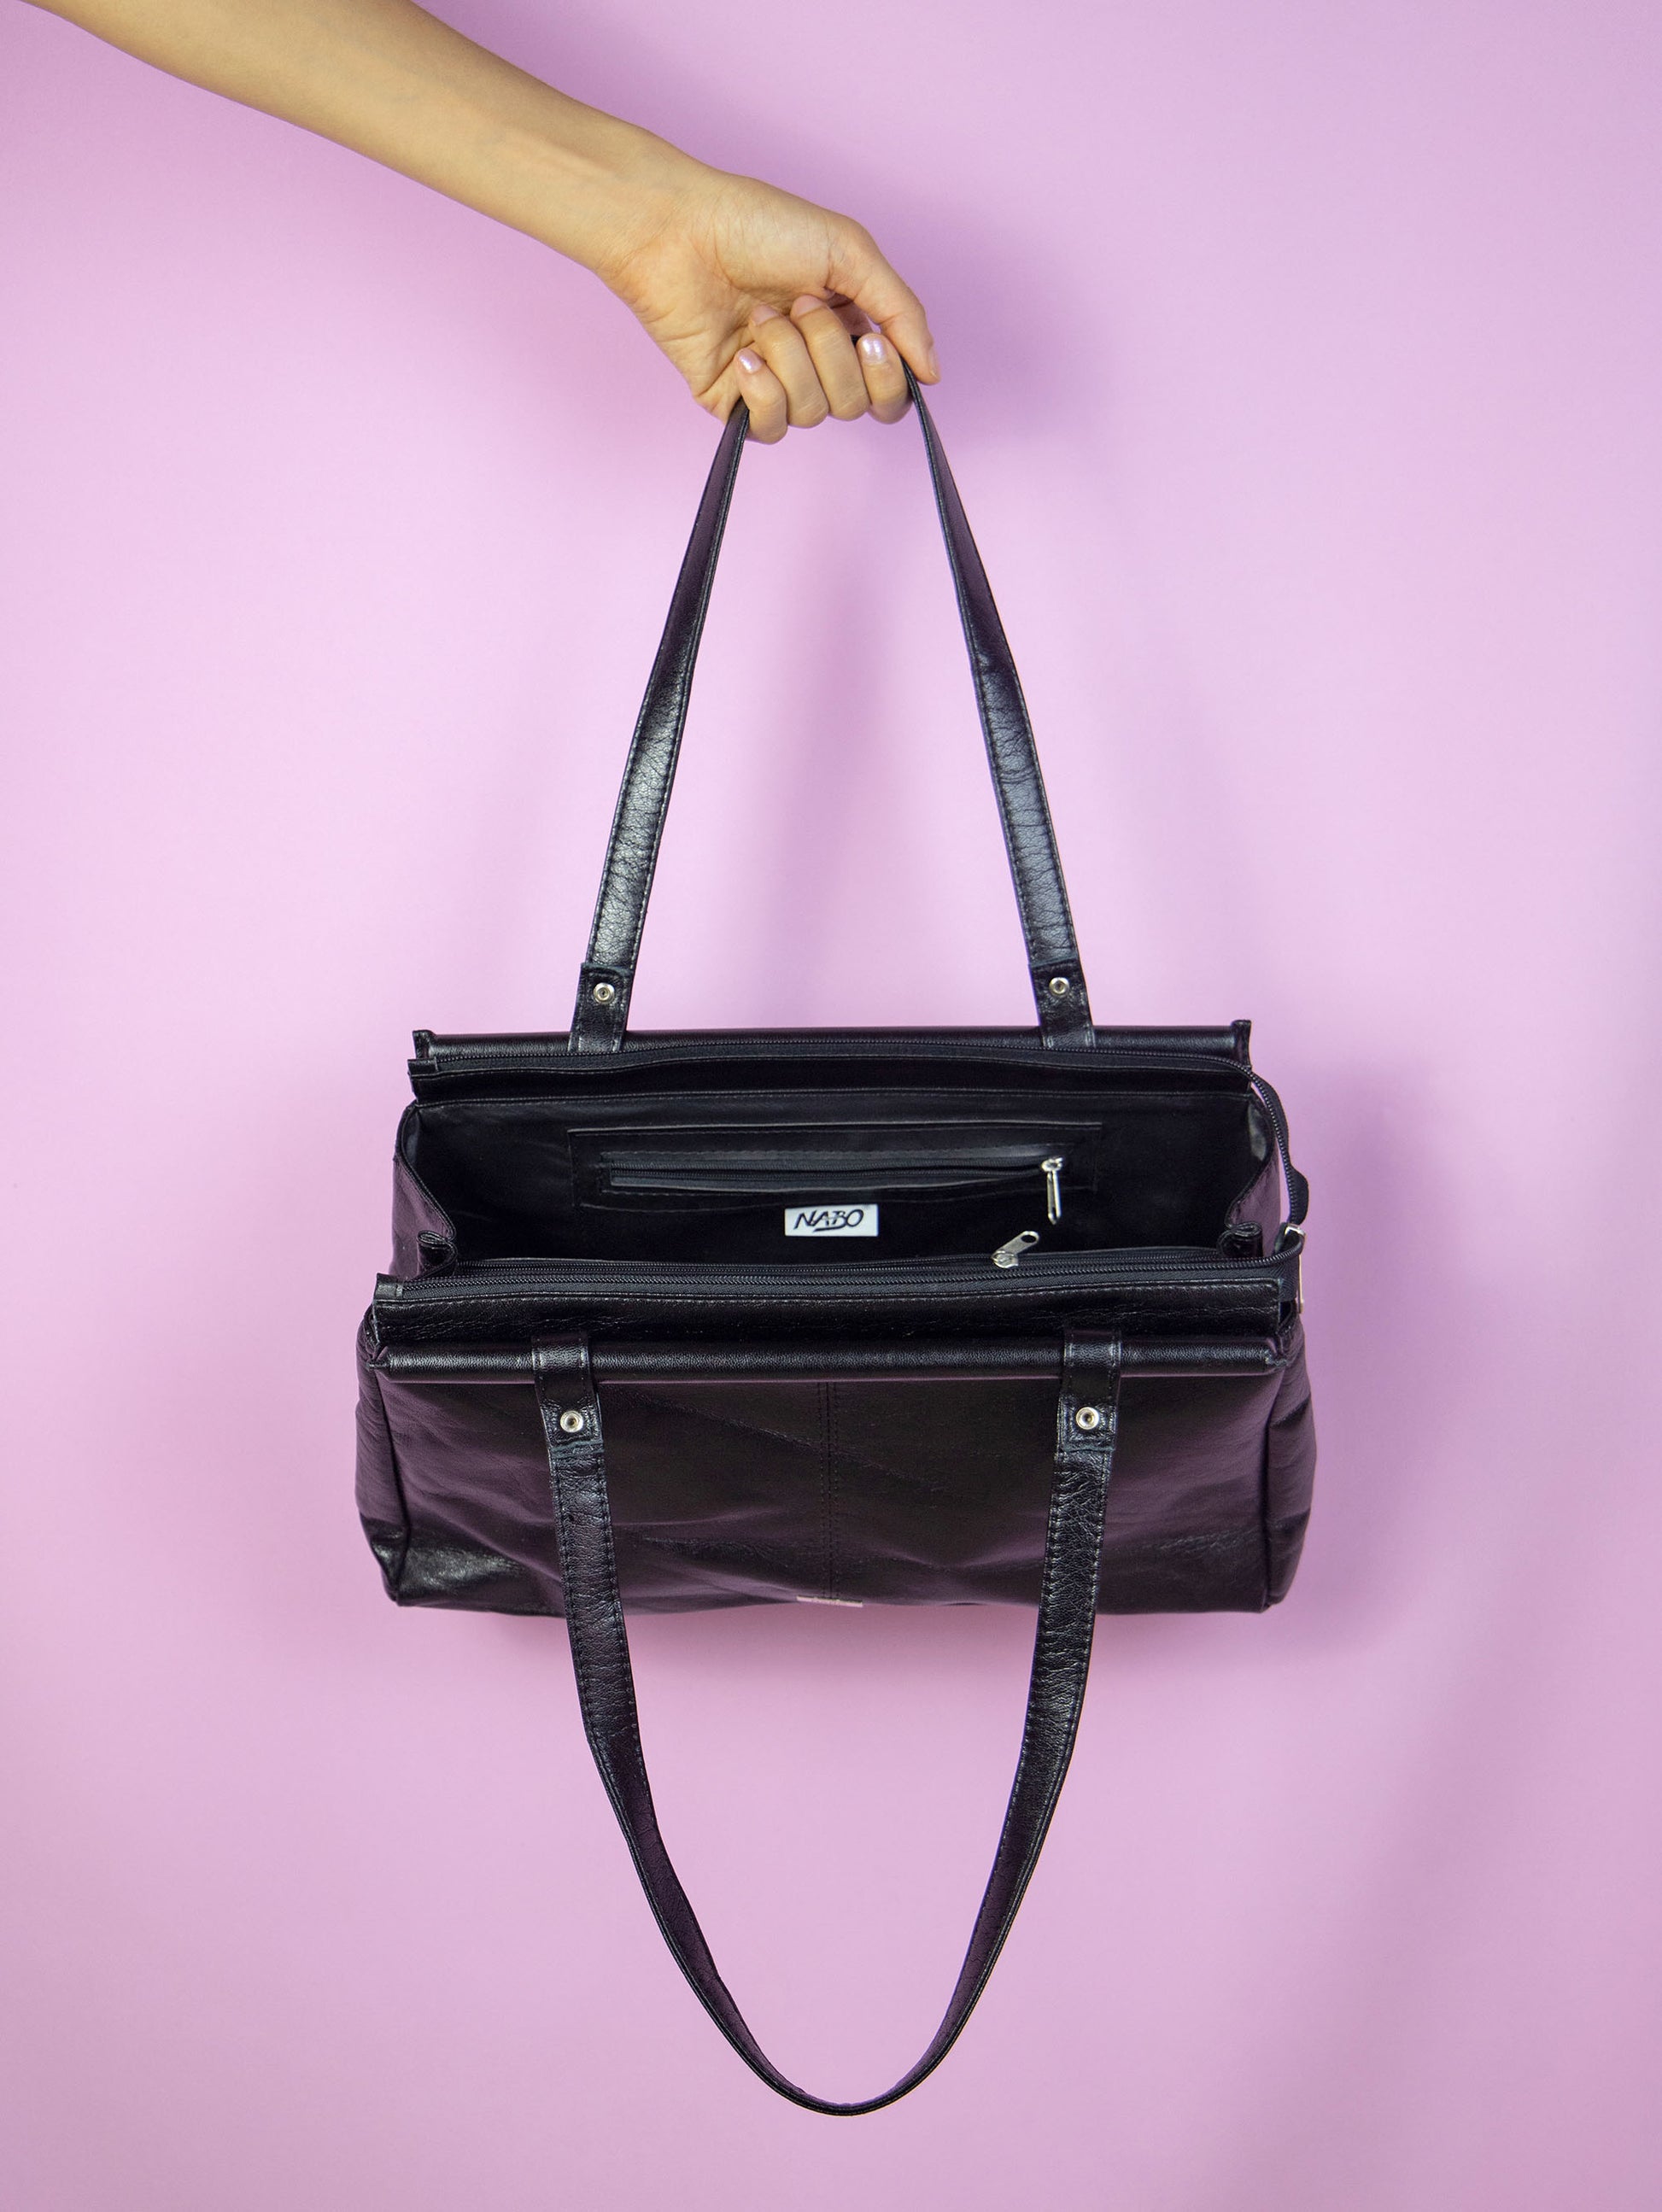 The Vintage 90s Black Shoulder Bag is a rectangular faux leather bag with several compartments, zipper closure and double handle. Casual retro minimalist 1990s handbag.